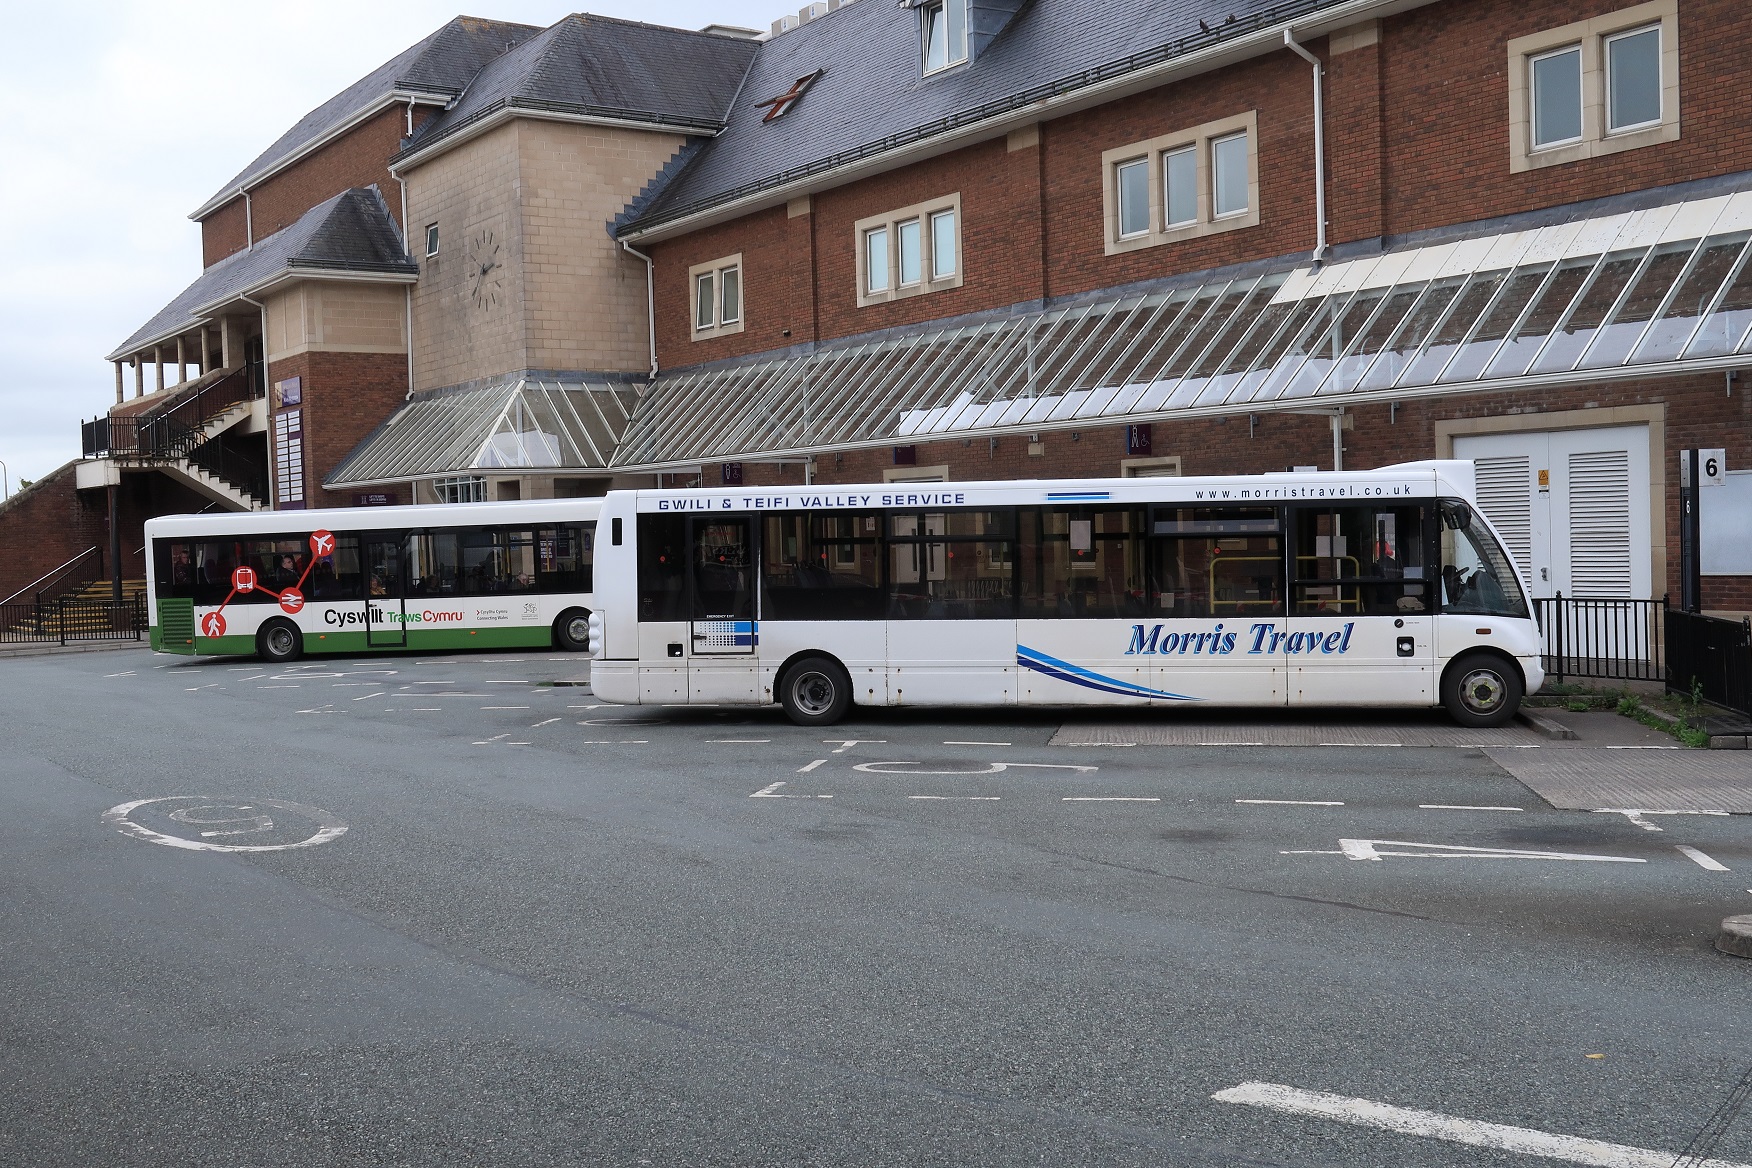 Bus regulation in Wales dependent on funding availability, says Welsh Government